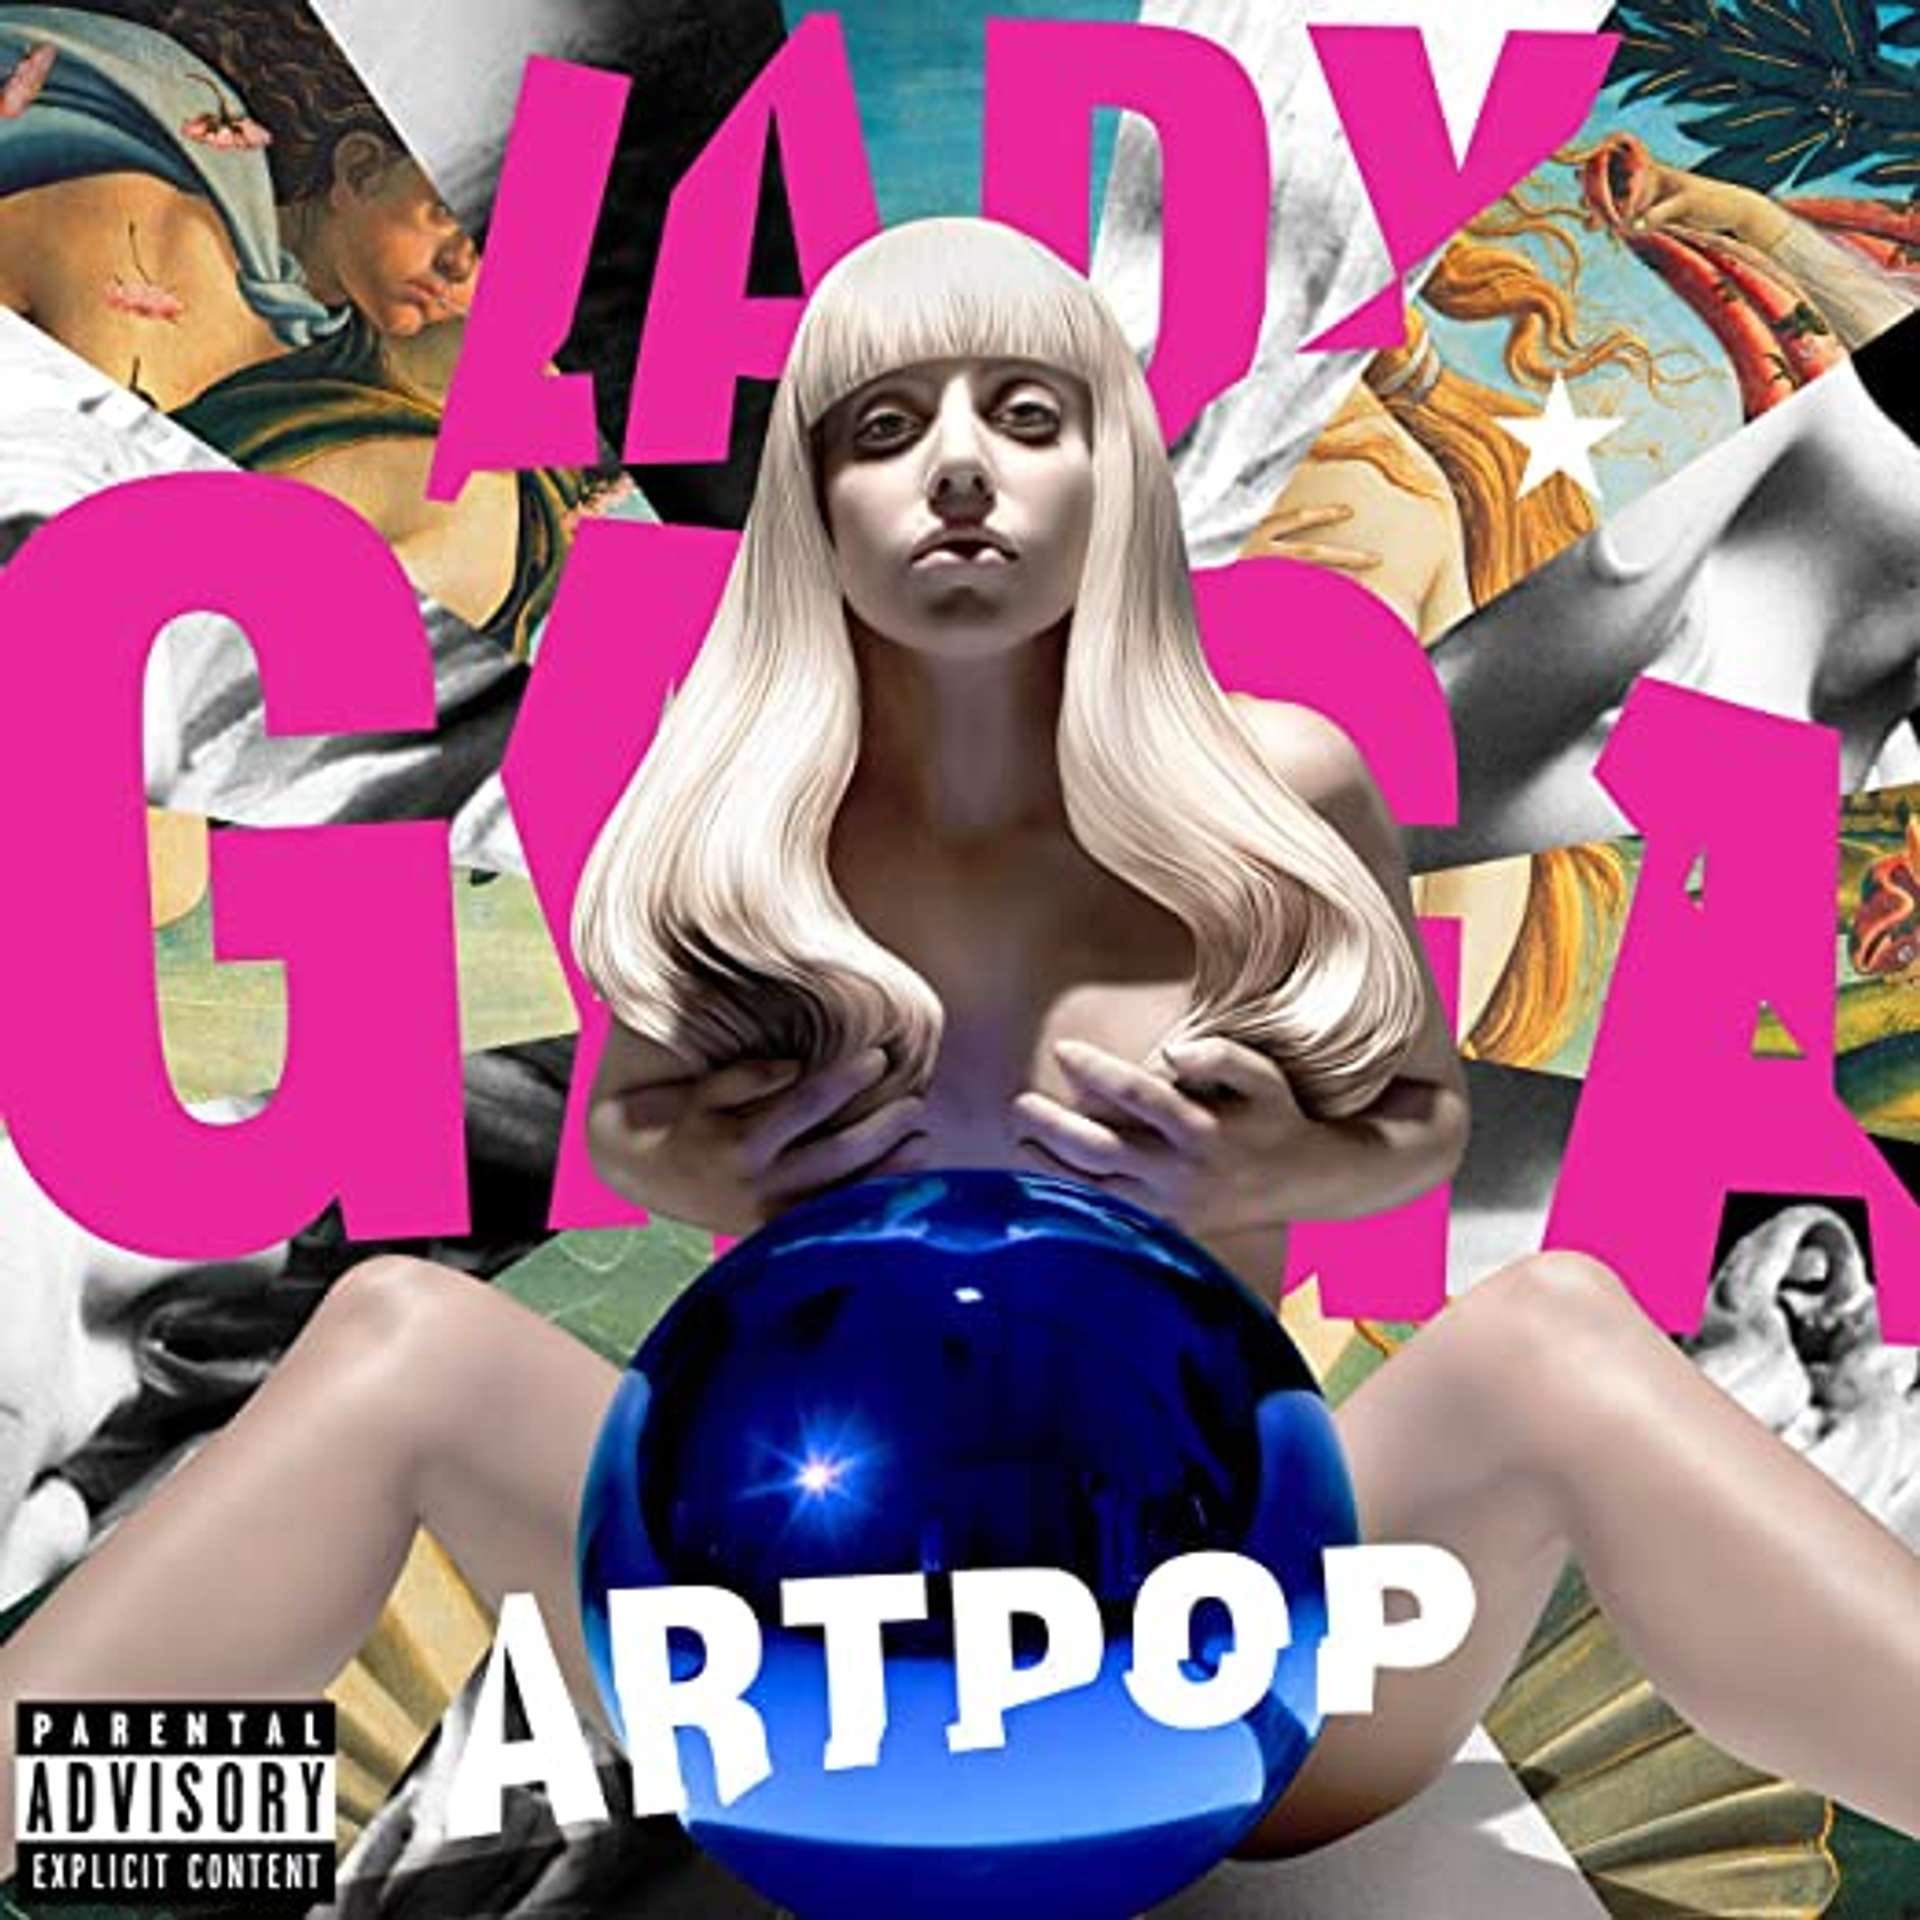 An image of the album cover for ARTPOP by Lady Gaga and designed by Jeff Koons. It has a collage-like composition, with a sculpture of Lady Gaga in the centre, surrounded by fragments of Botticelli's The Birth of Venus and other patterns.